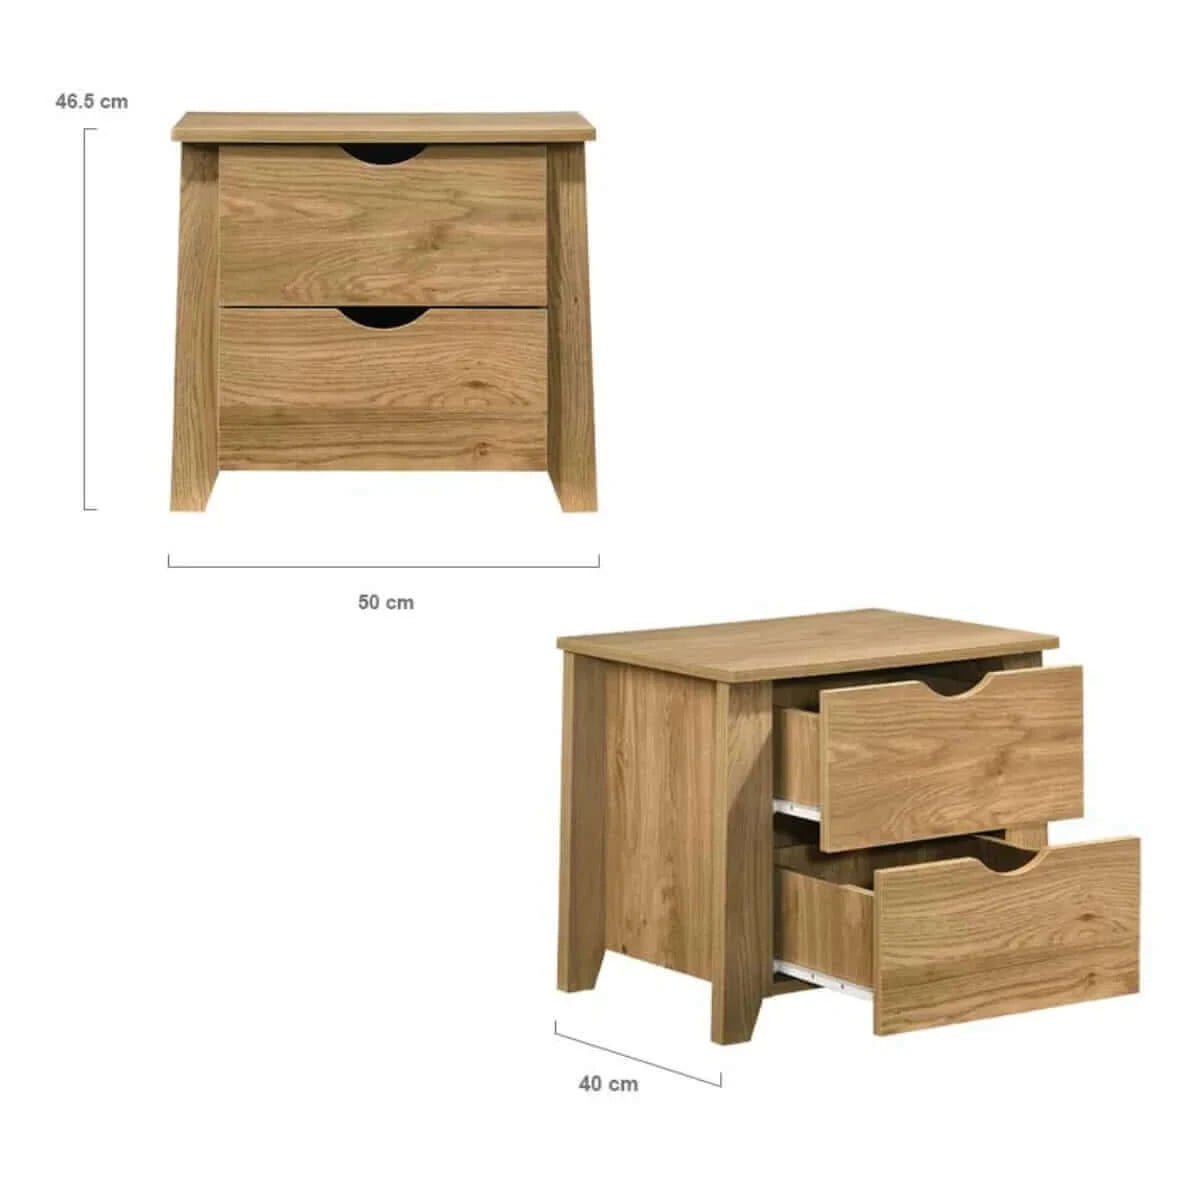 Buy mica wooden bedside table with 2 drawers - upinteriors-Upinteriors